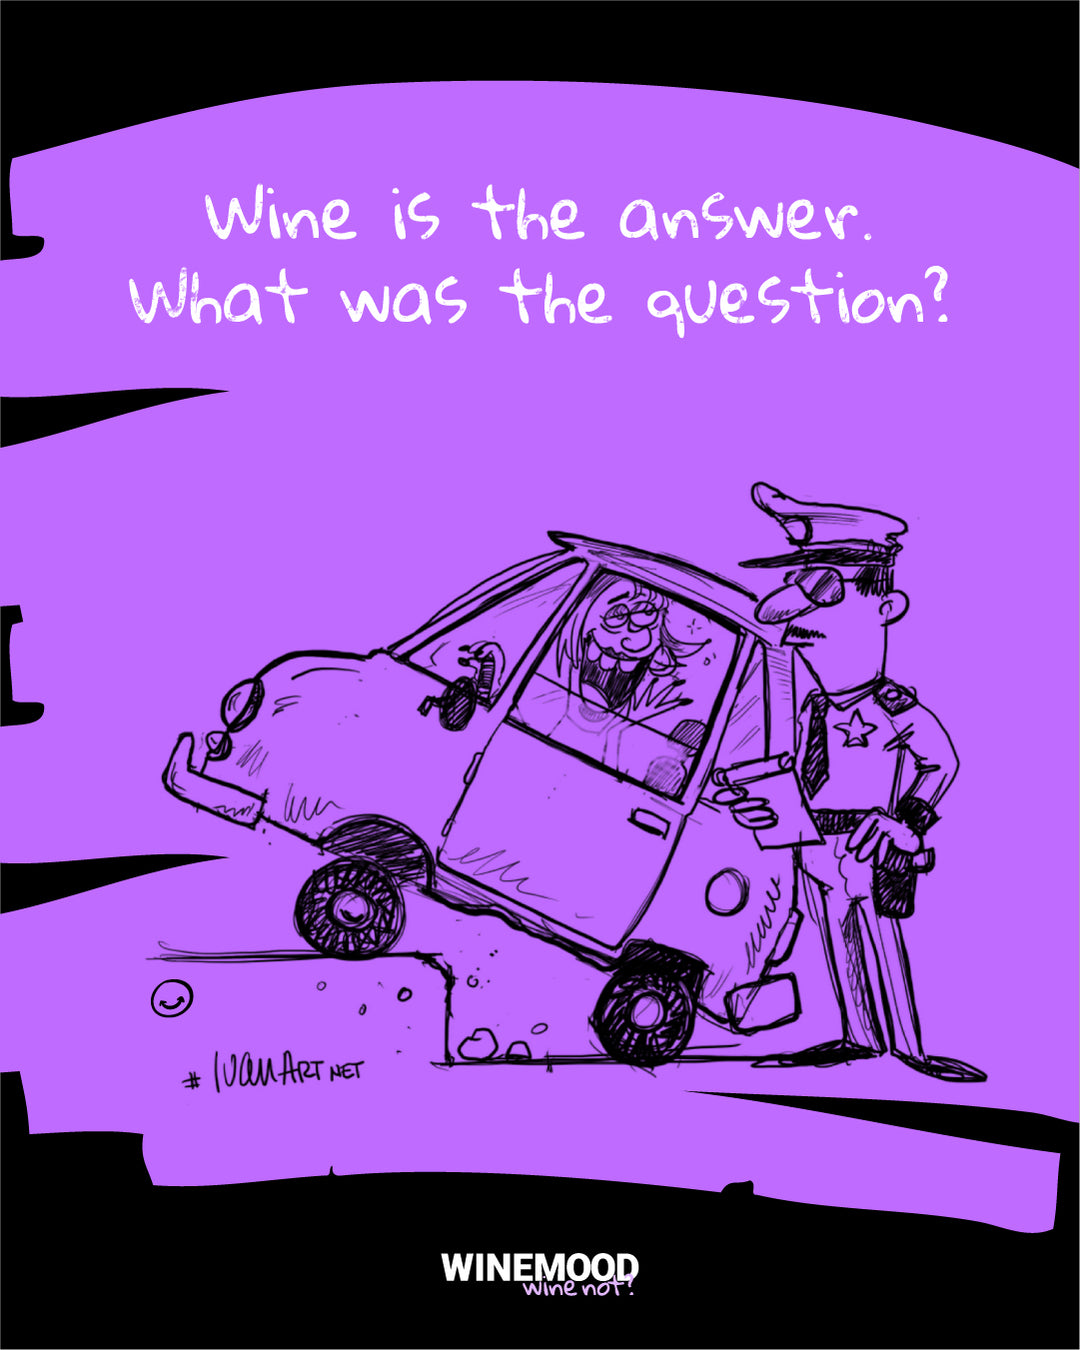 About questions